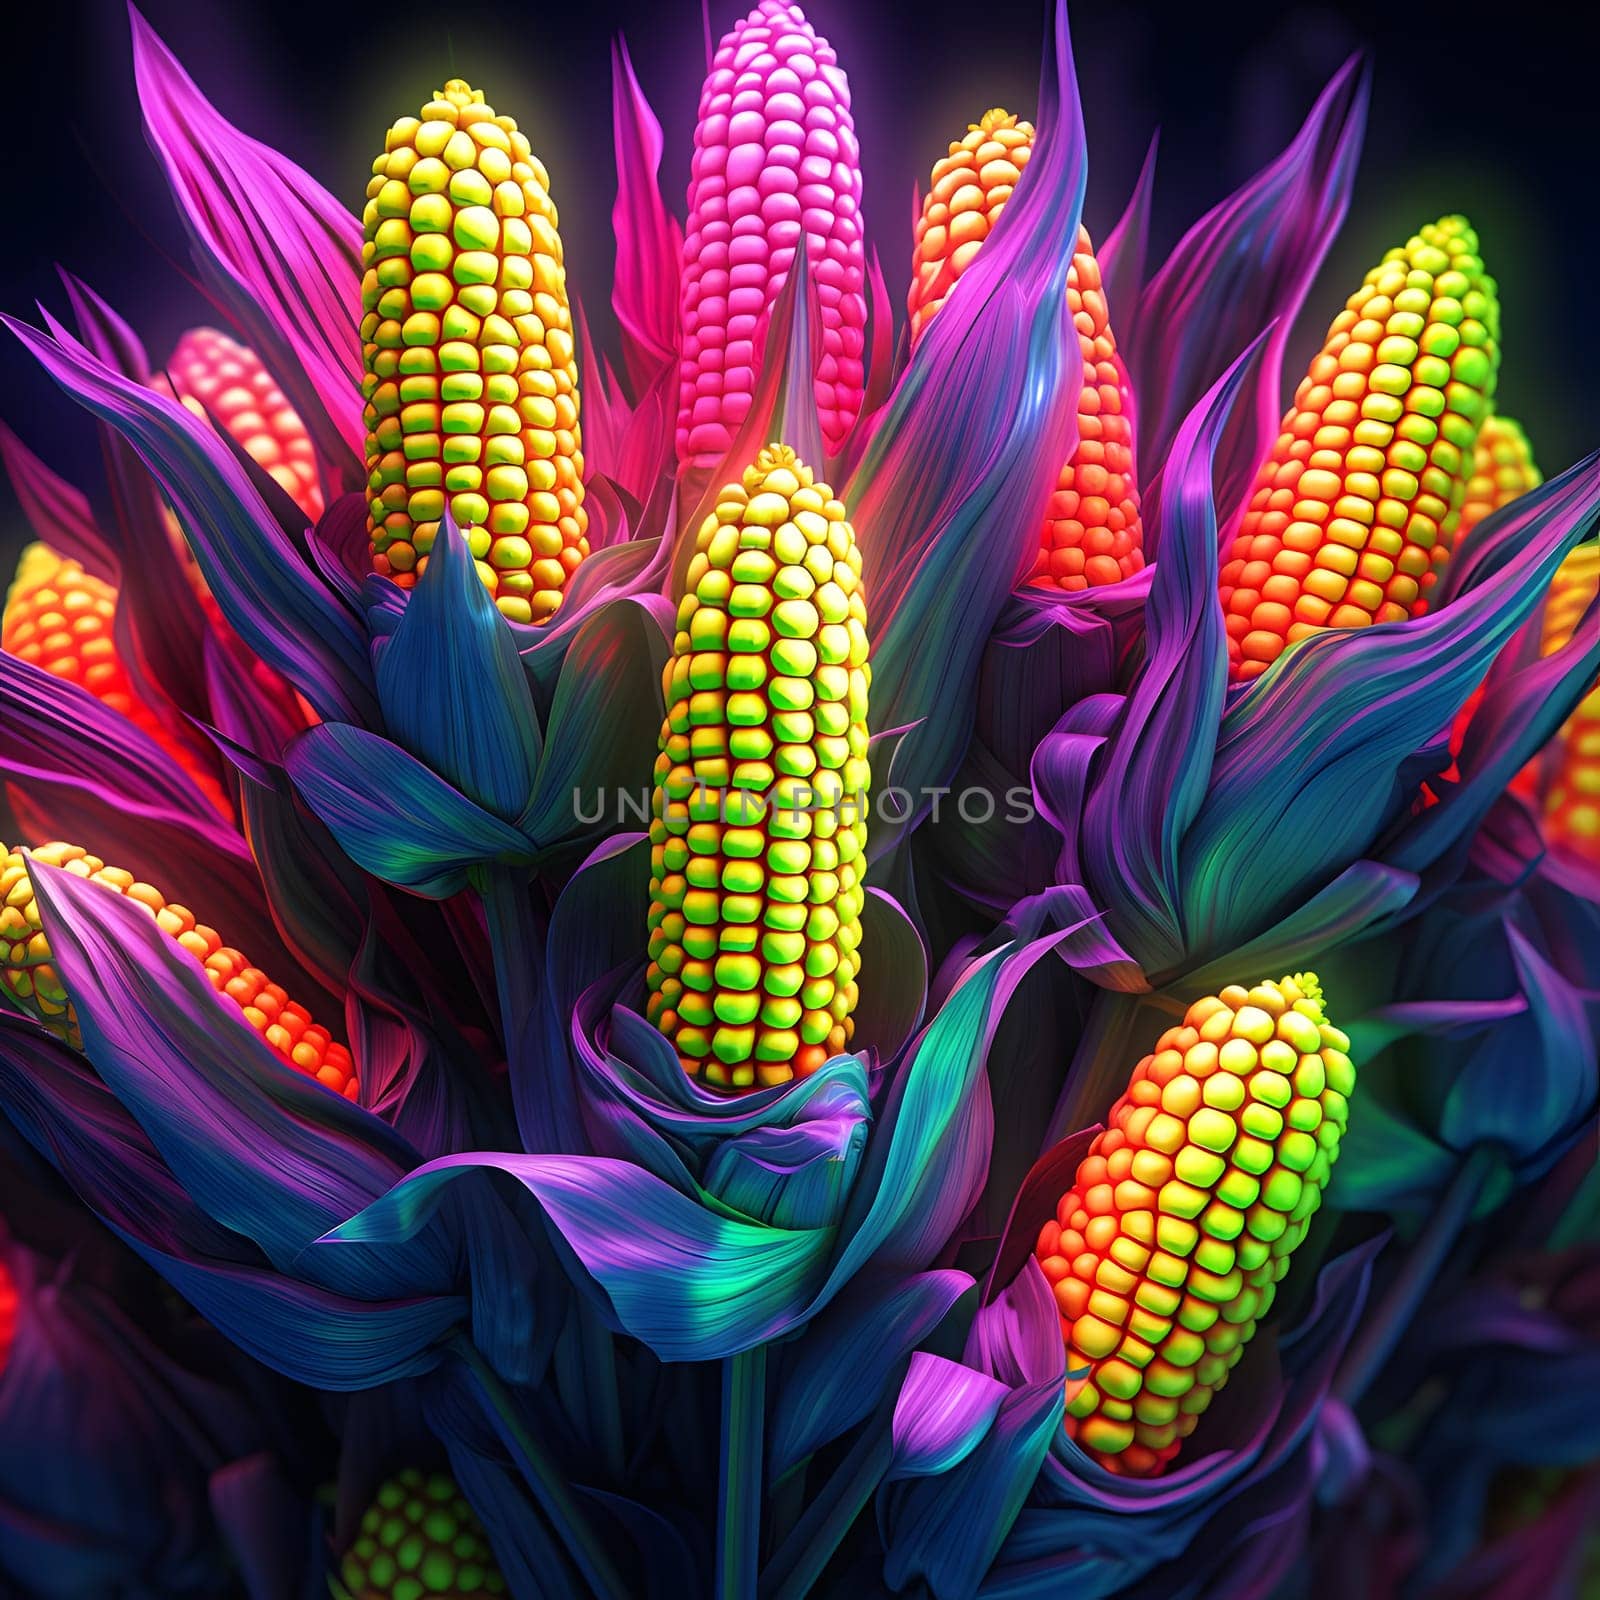 Yellow Corn Cobs on Purple Pink Green, Stalks and Leaves. Corn as a dish of thanksgiving for the harvest. An atmosphere of joy and celebration.